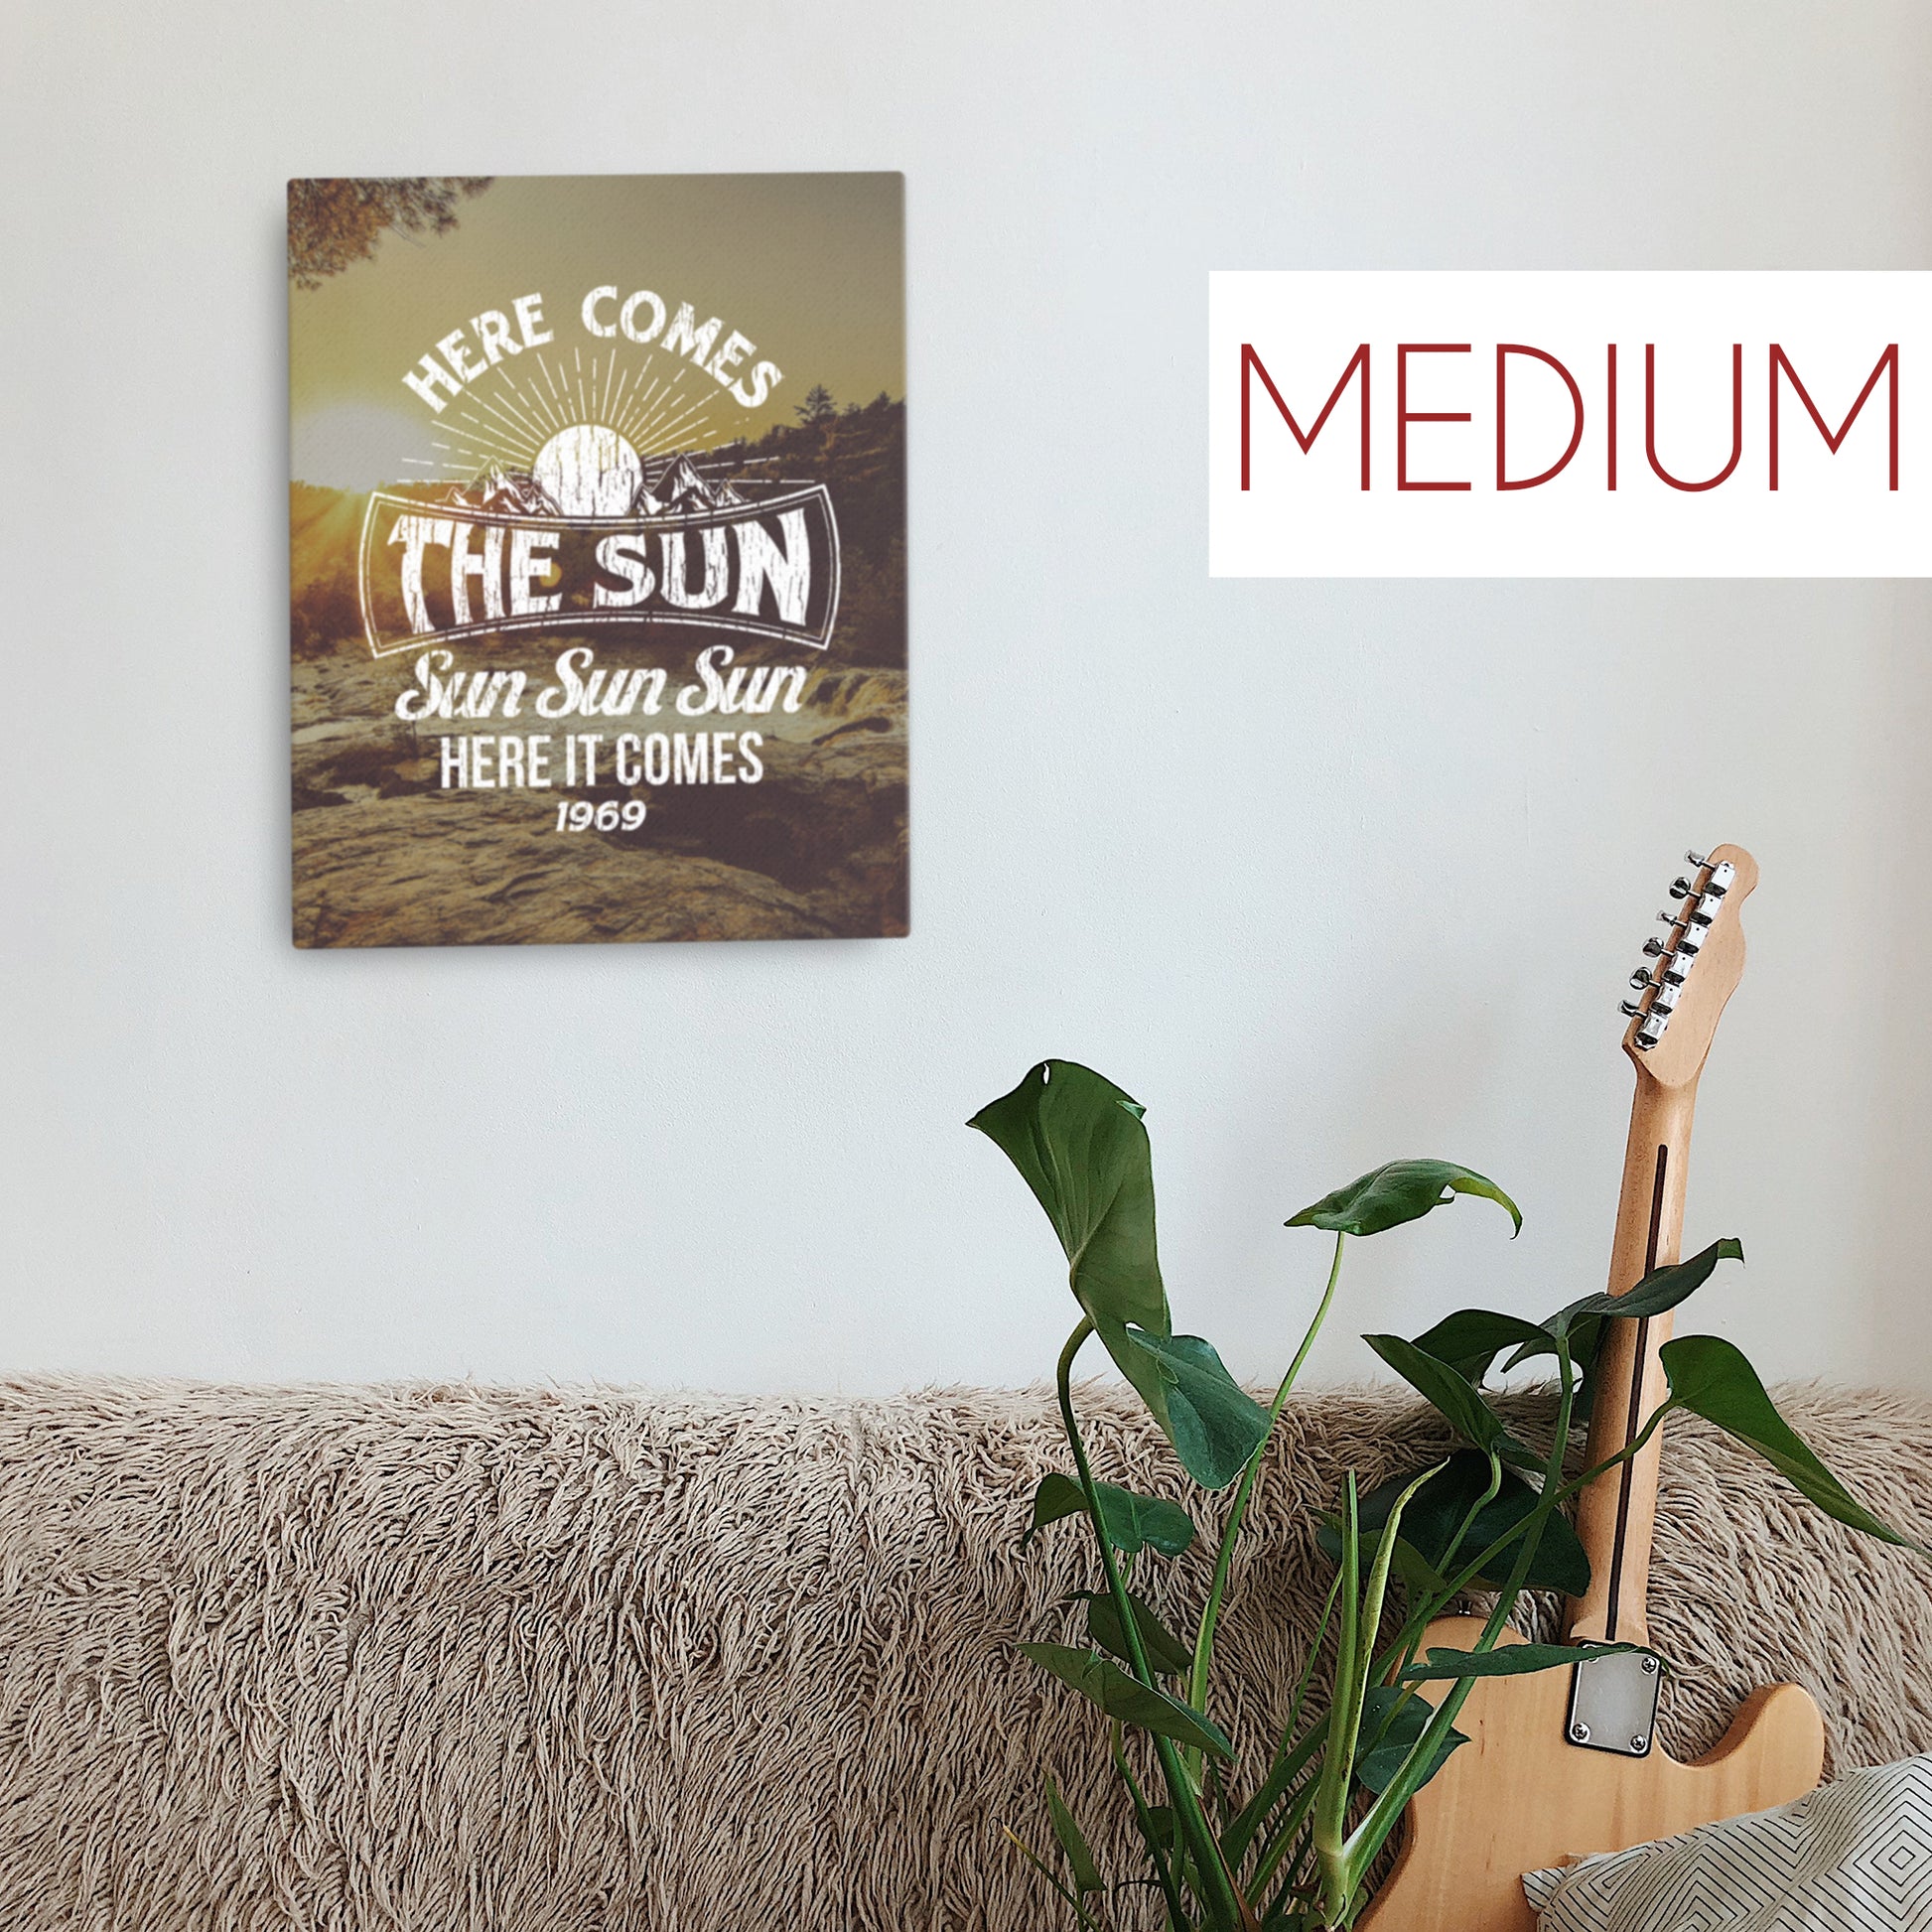 The Beatles - Here Comes The Sun - Medium Canvas